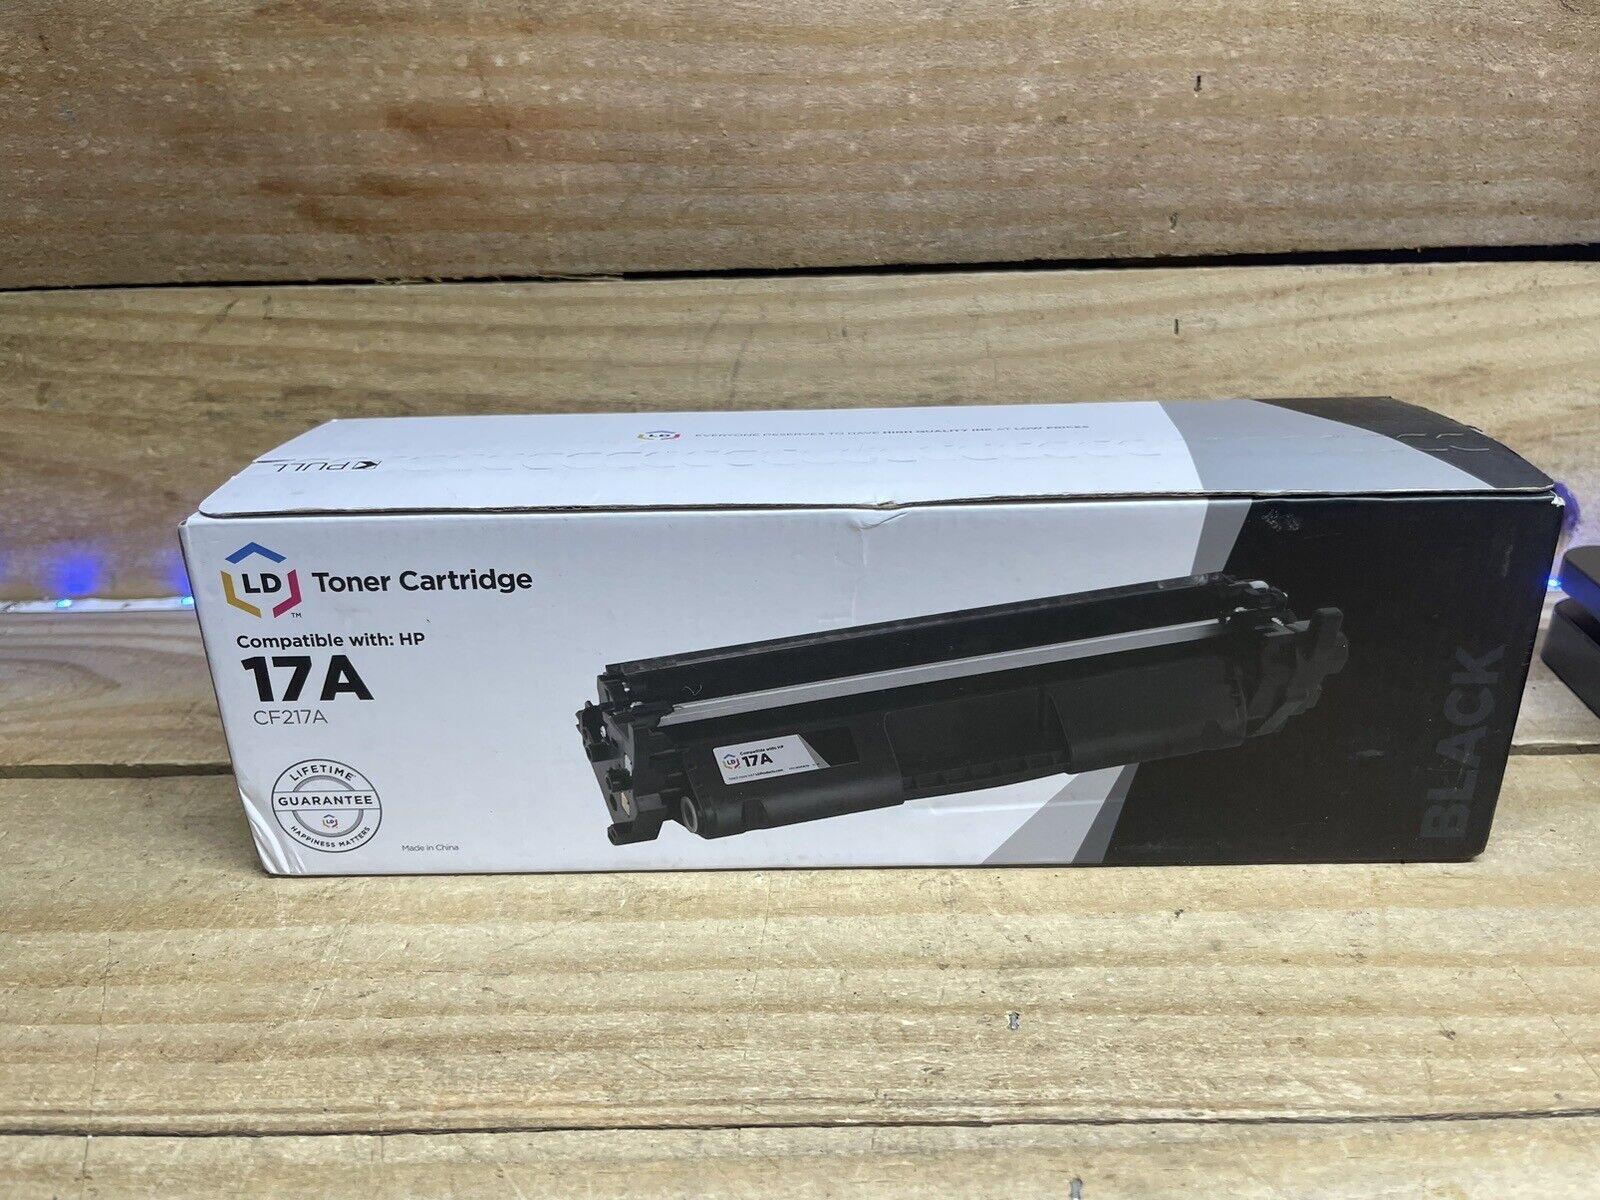 New LD Black Laser Toner Cartridge for HP 17A CF217A MFP M130fn M130fw 17 & More